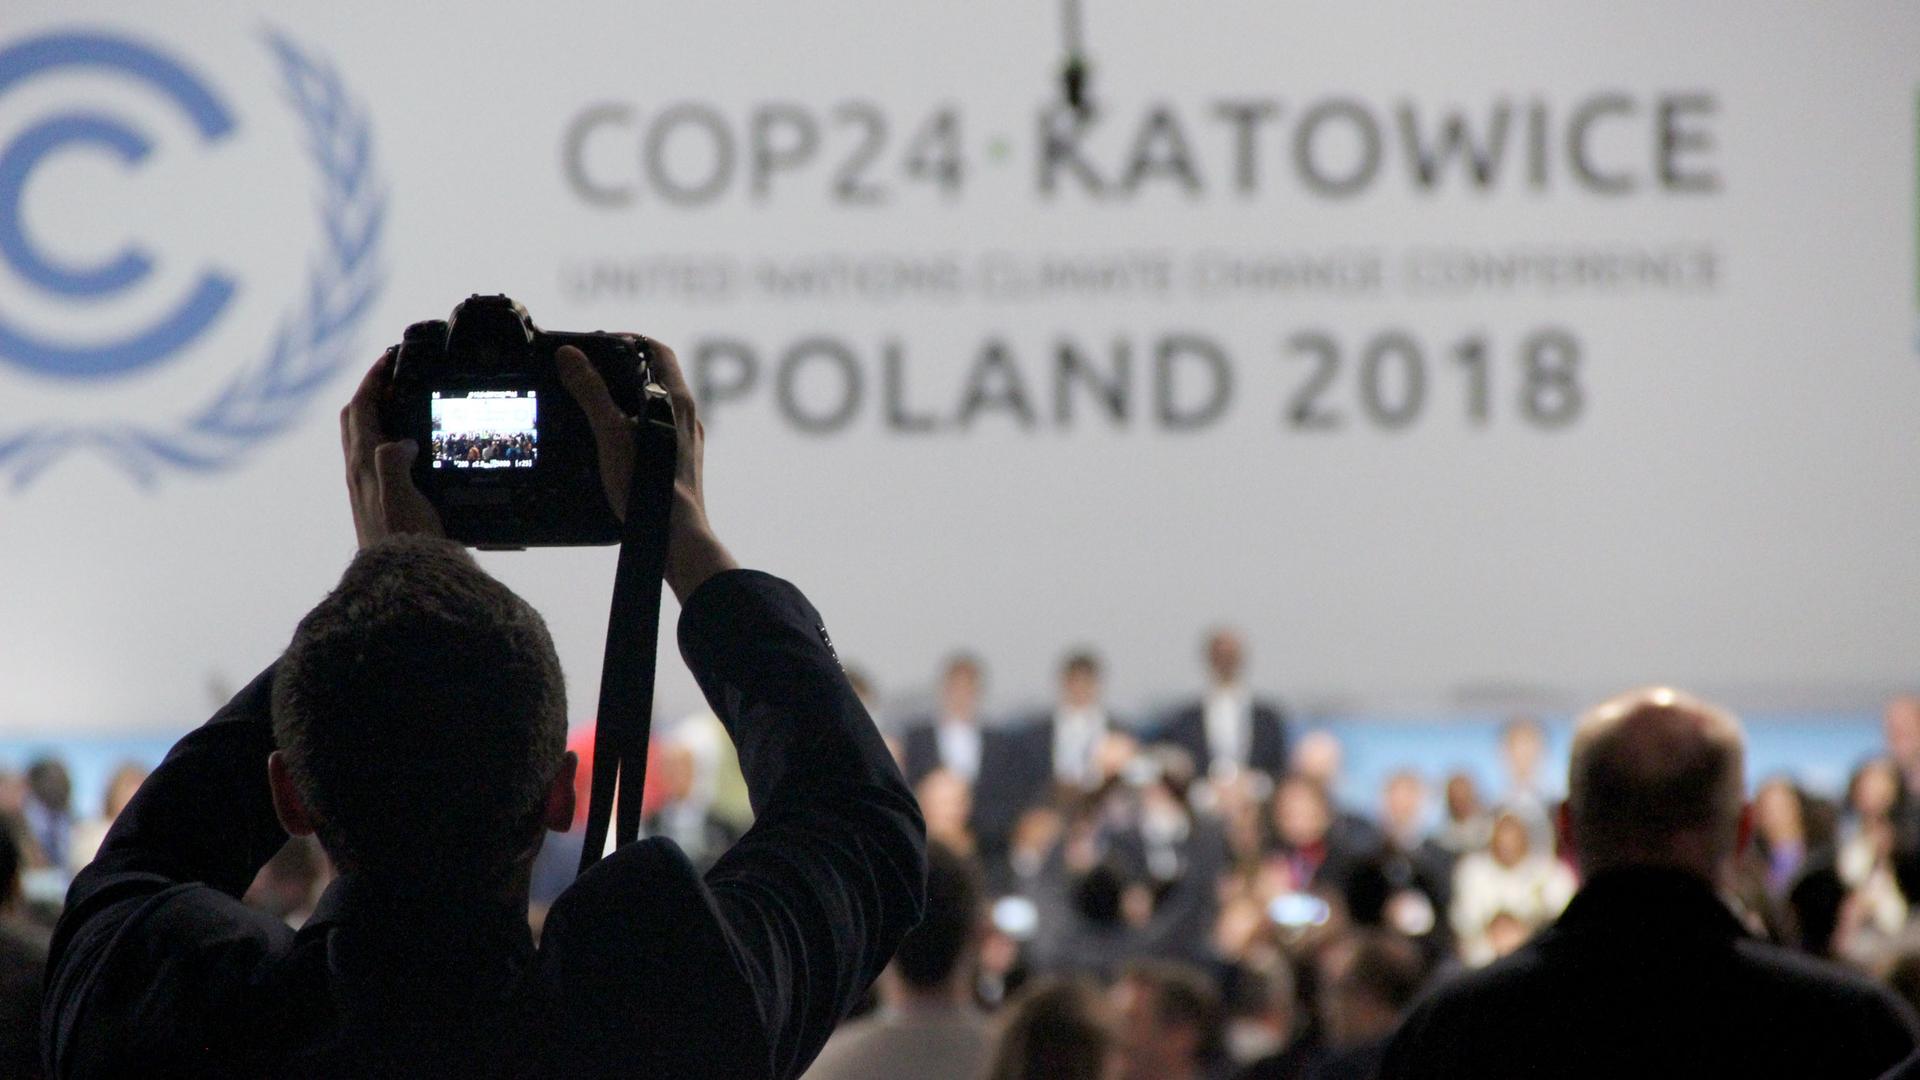 A digital camera is held up over the heads of others and the screen lights up as it takes a photo of those assembled on the stage at the front of the room